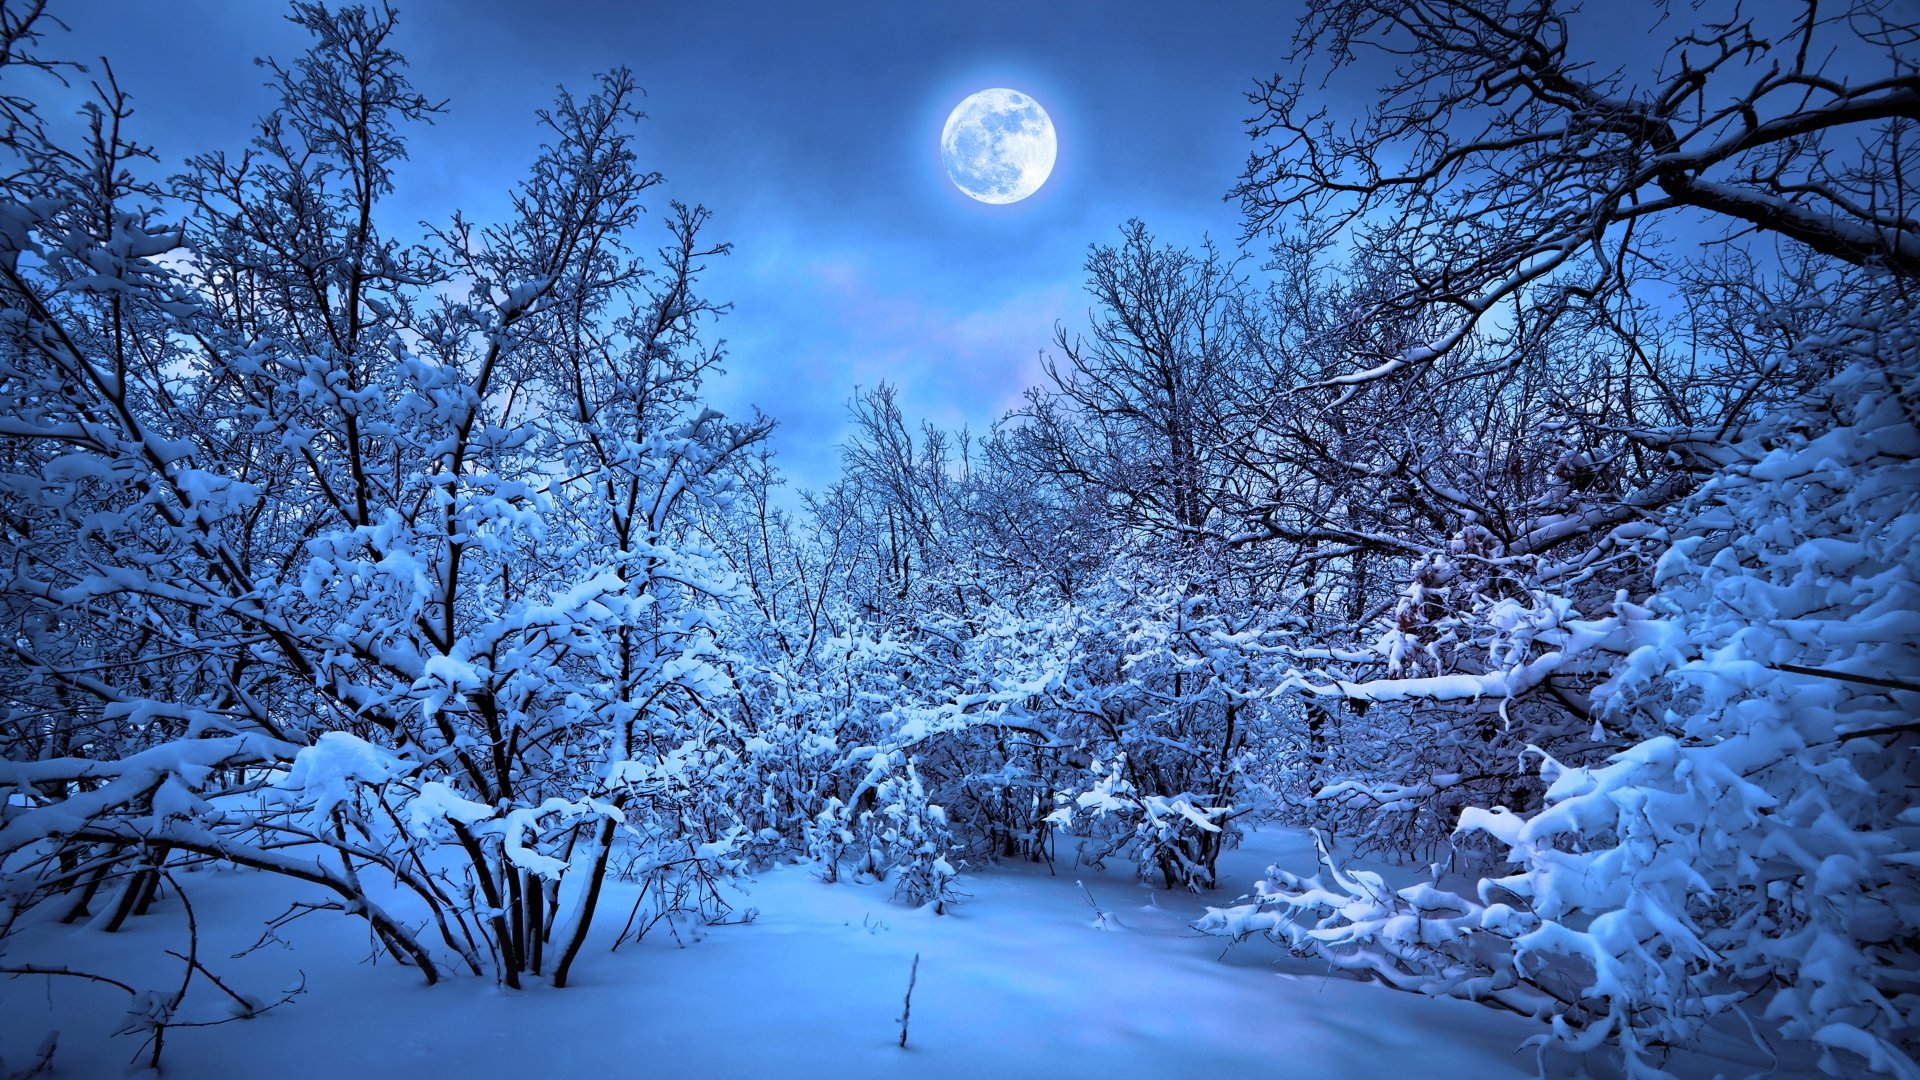 awesome snowfall HD Moon Background